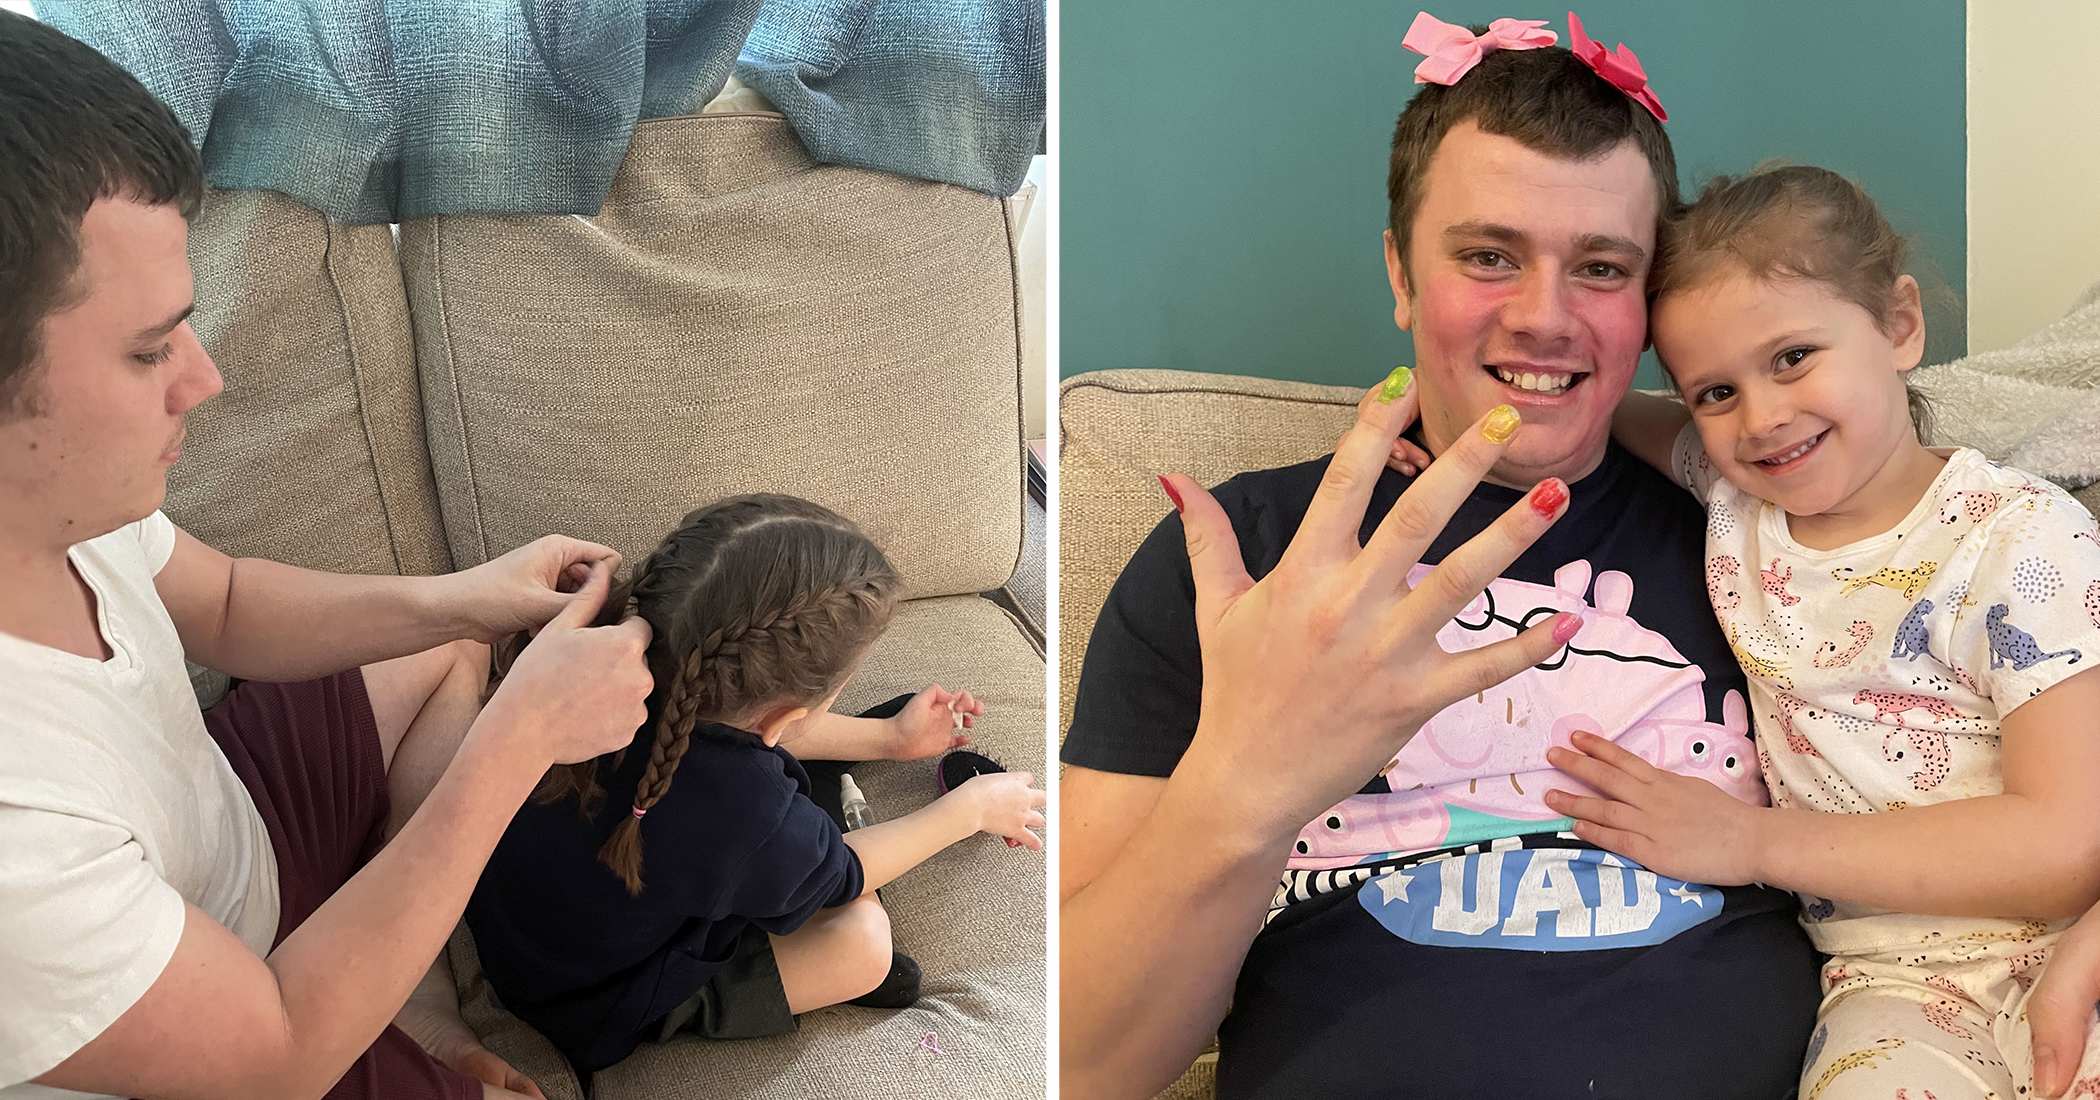 Man Hailed As 'World's Best Dad' After He Learned to Style Hair to Play  With His Daughter